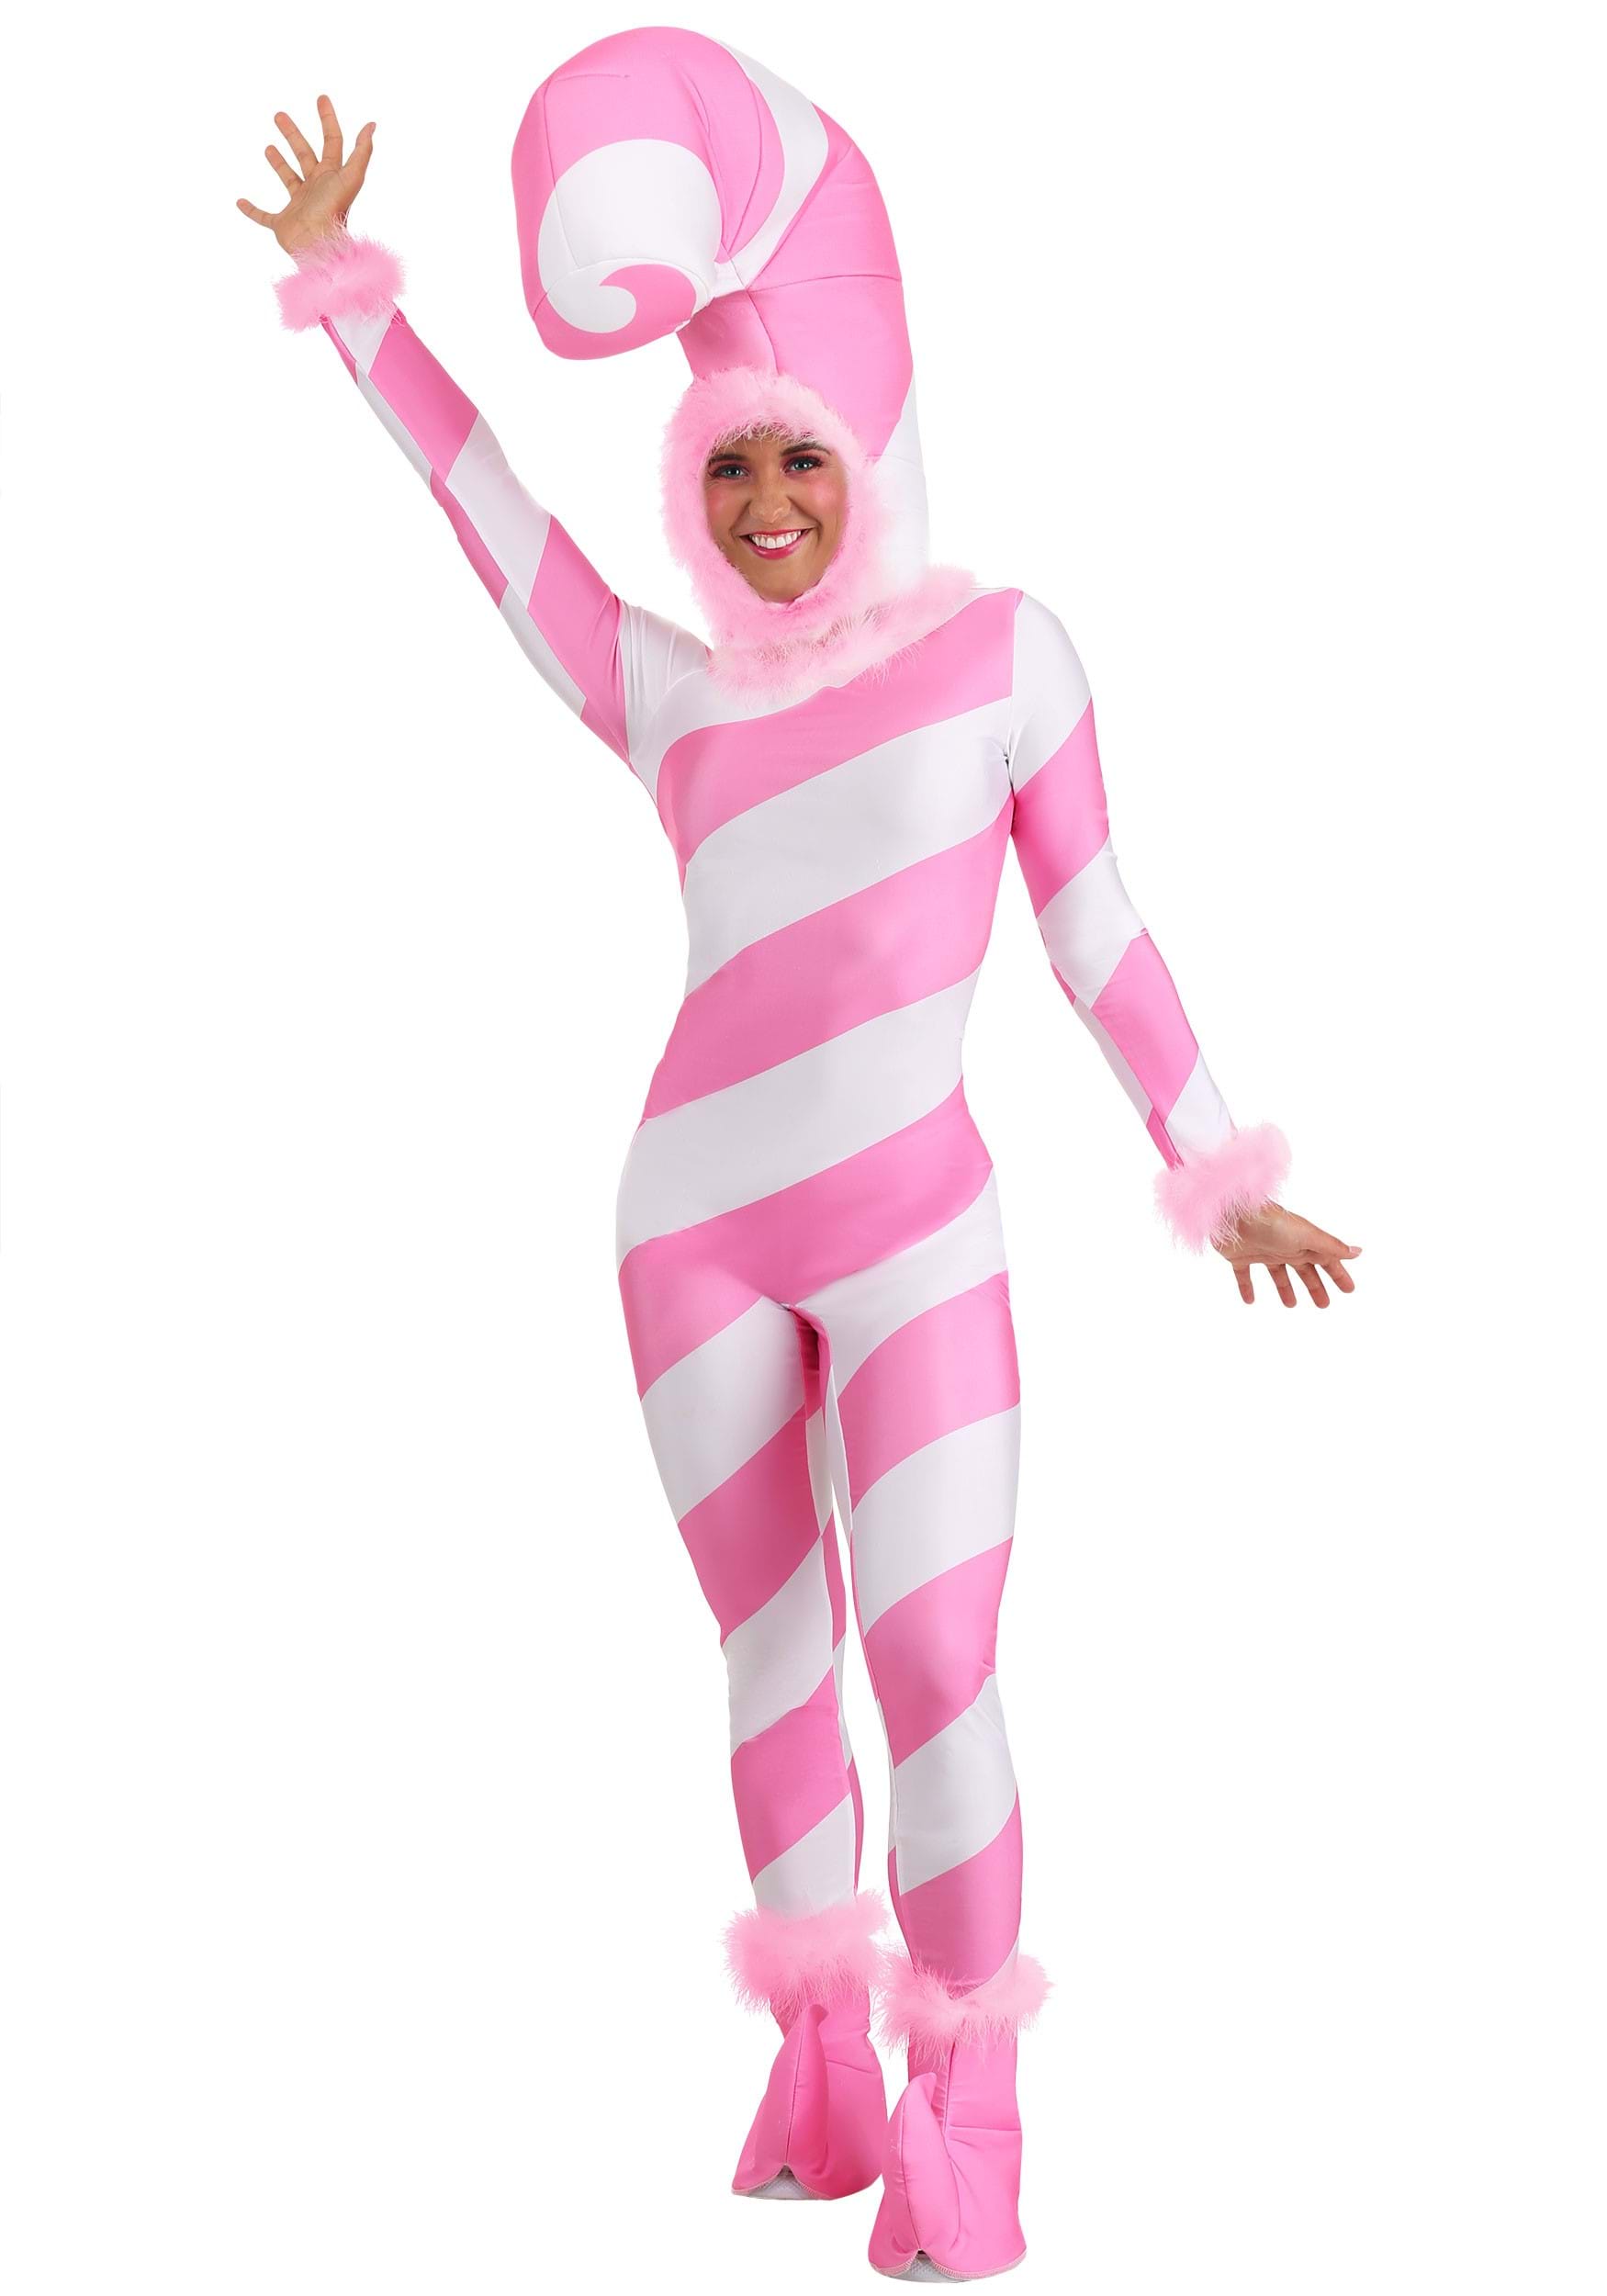 Photos - Fancy Dress Candy FUN Costumes Pink  Cane Jumpsuit for Women Pink/White FUN0916AD 